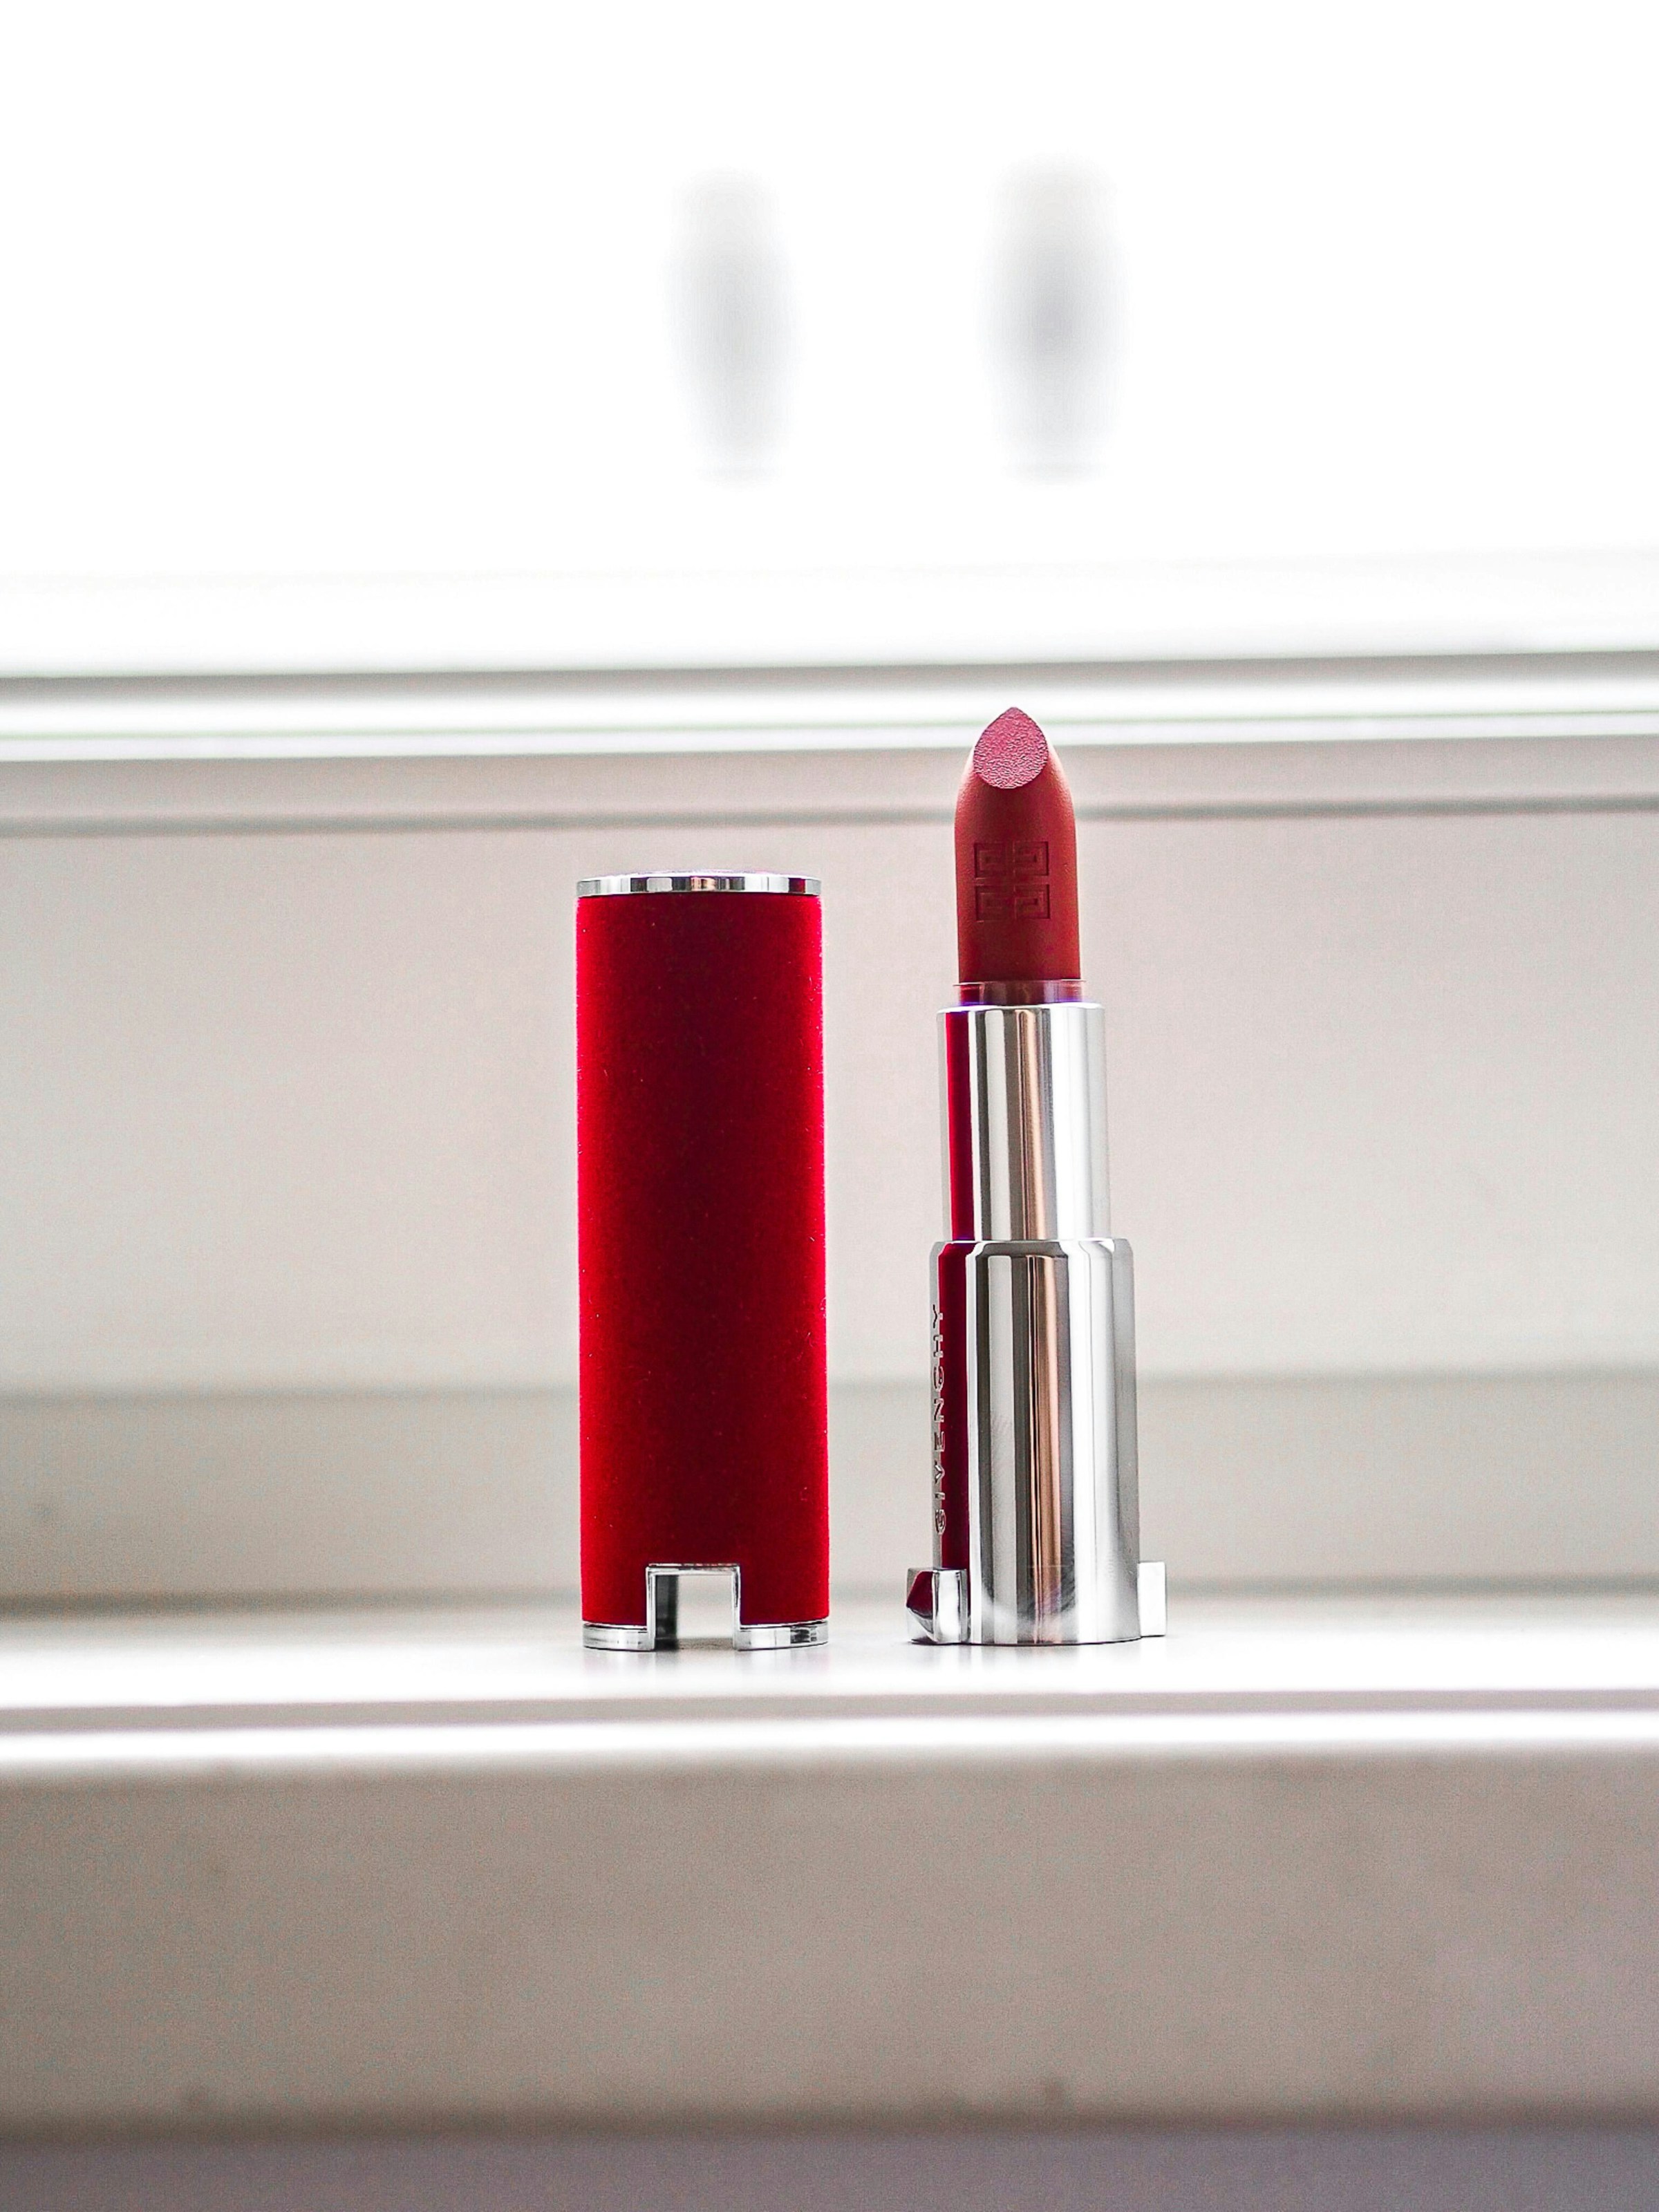 Red lipstick on a white table | Source: Unsplash